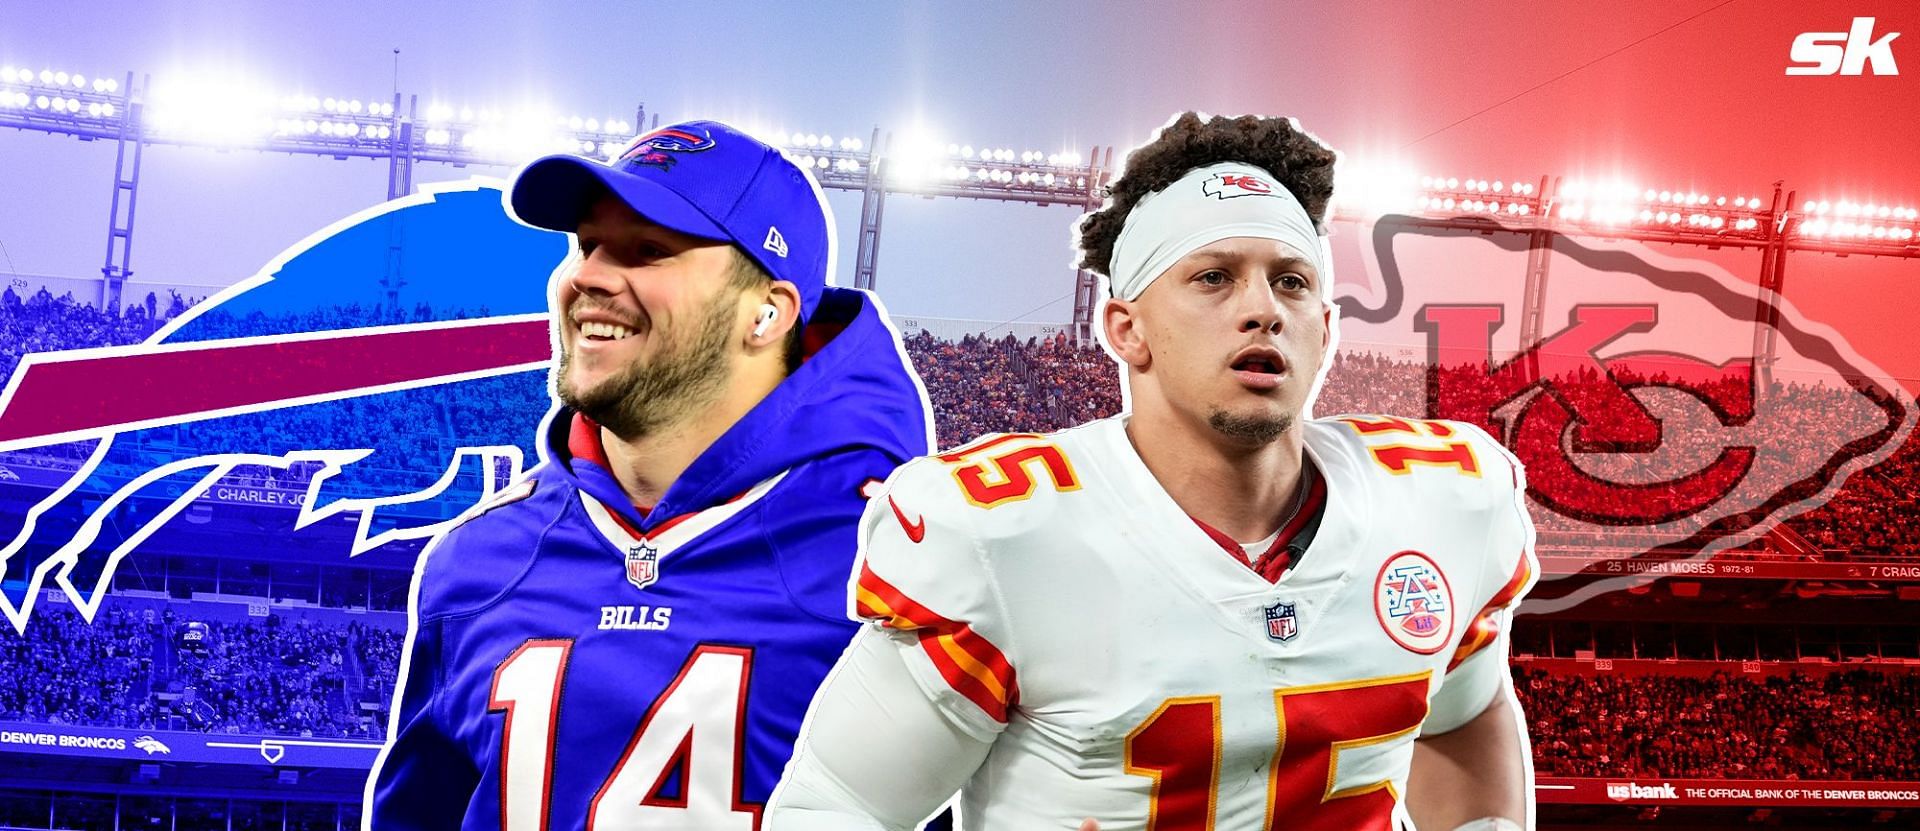 ESPN&rsquo;s Mina Kimes accuses Patrick Mahomes, Josh Allen of being &ldquo;elite floppers&rdquo; ahead of Divisional Playoff faceoff